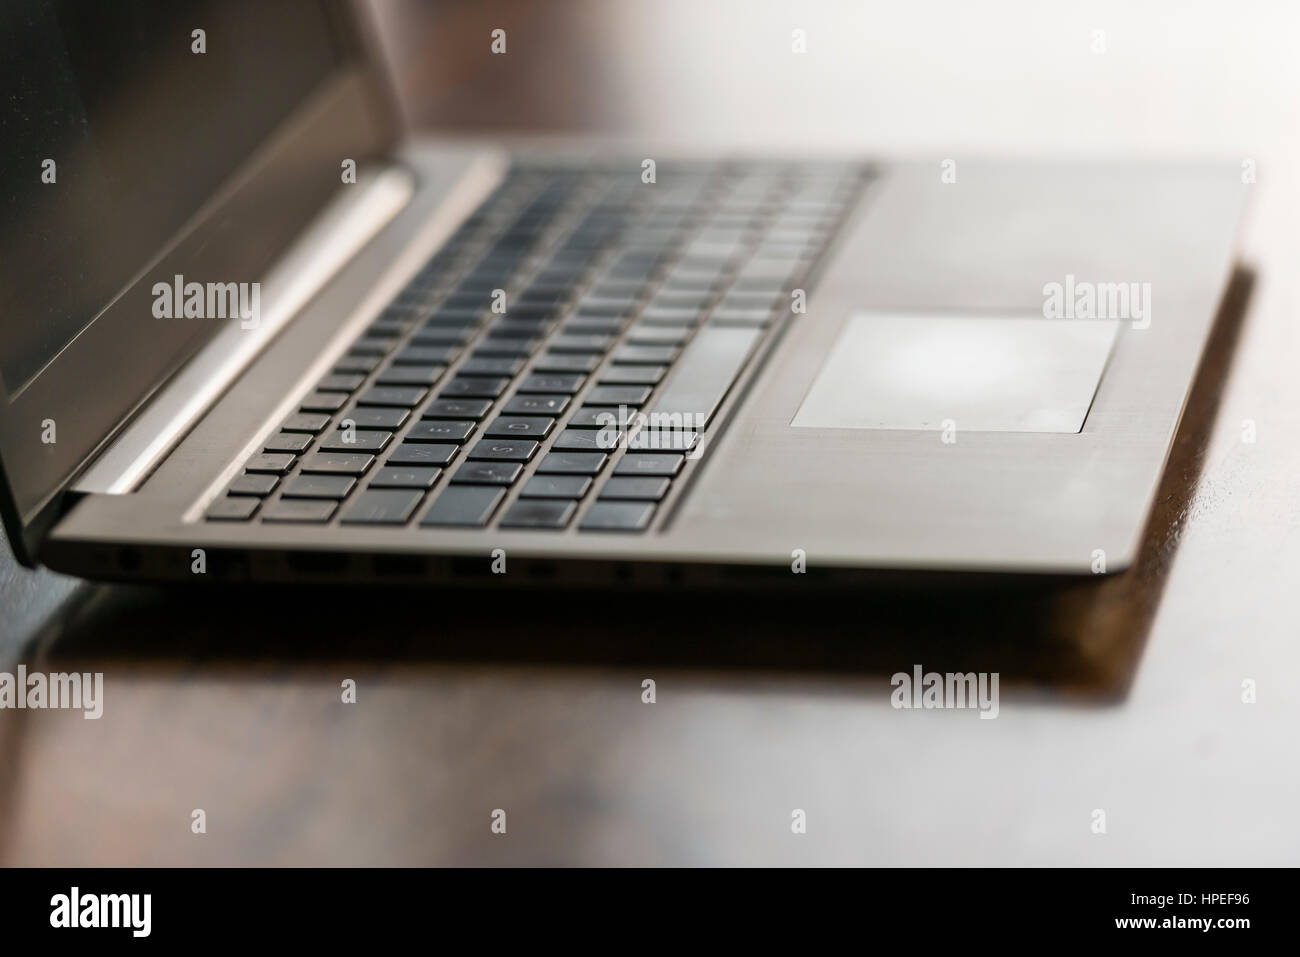 Opened laptop computer on a wooden desk. Focus on touchpad, backlight, no people Stock Photo